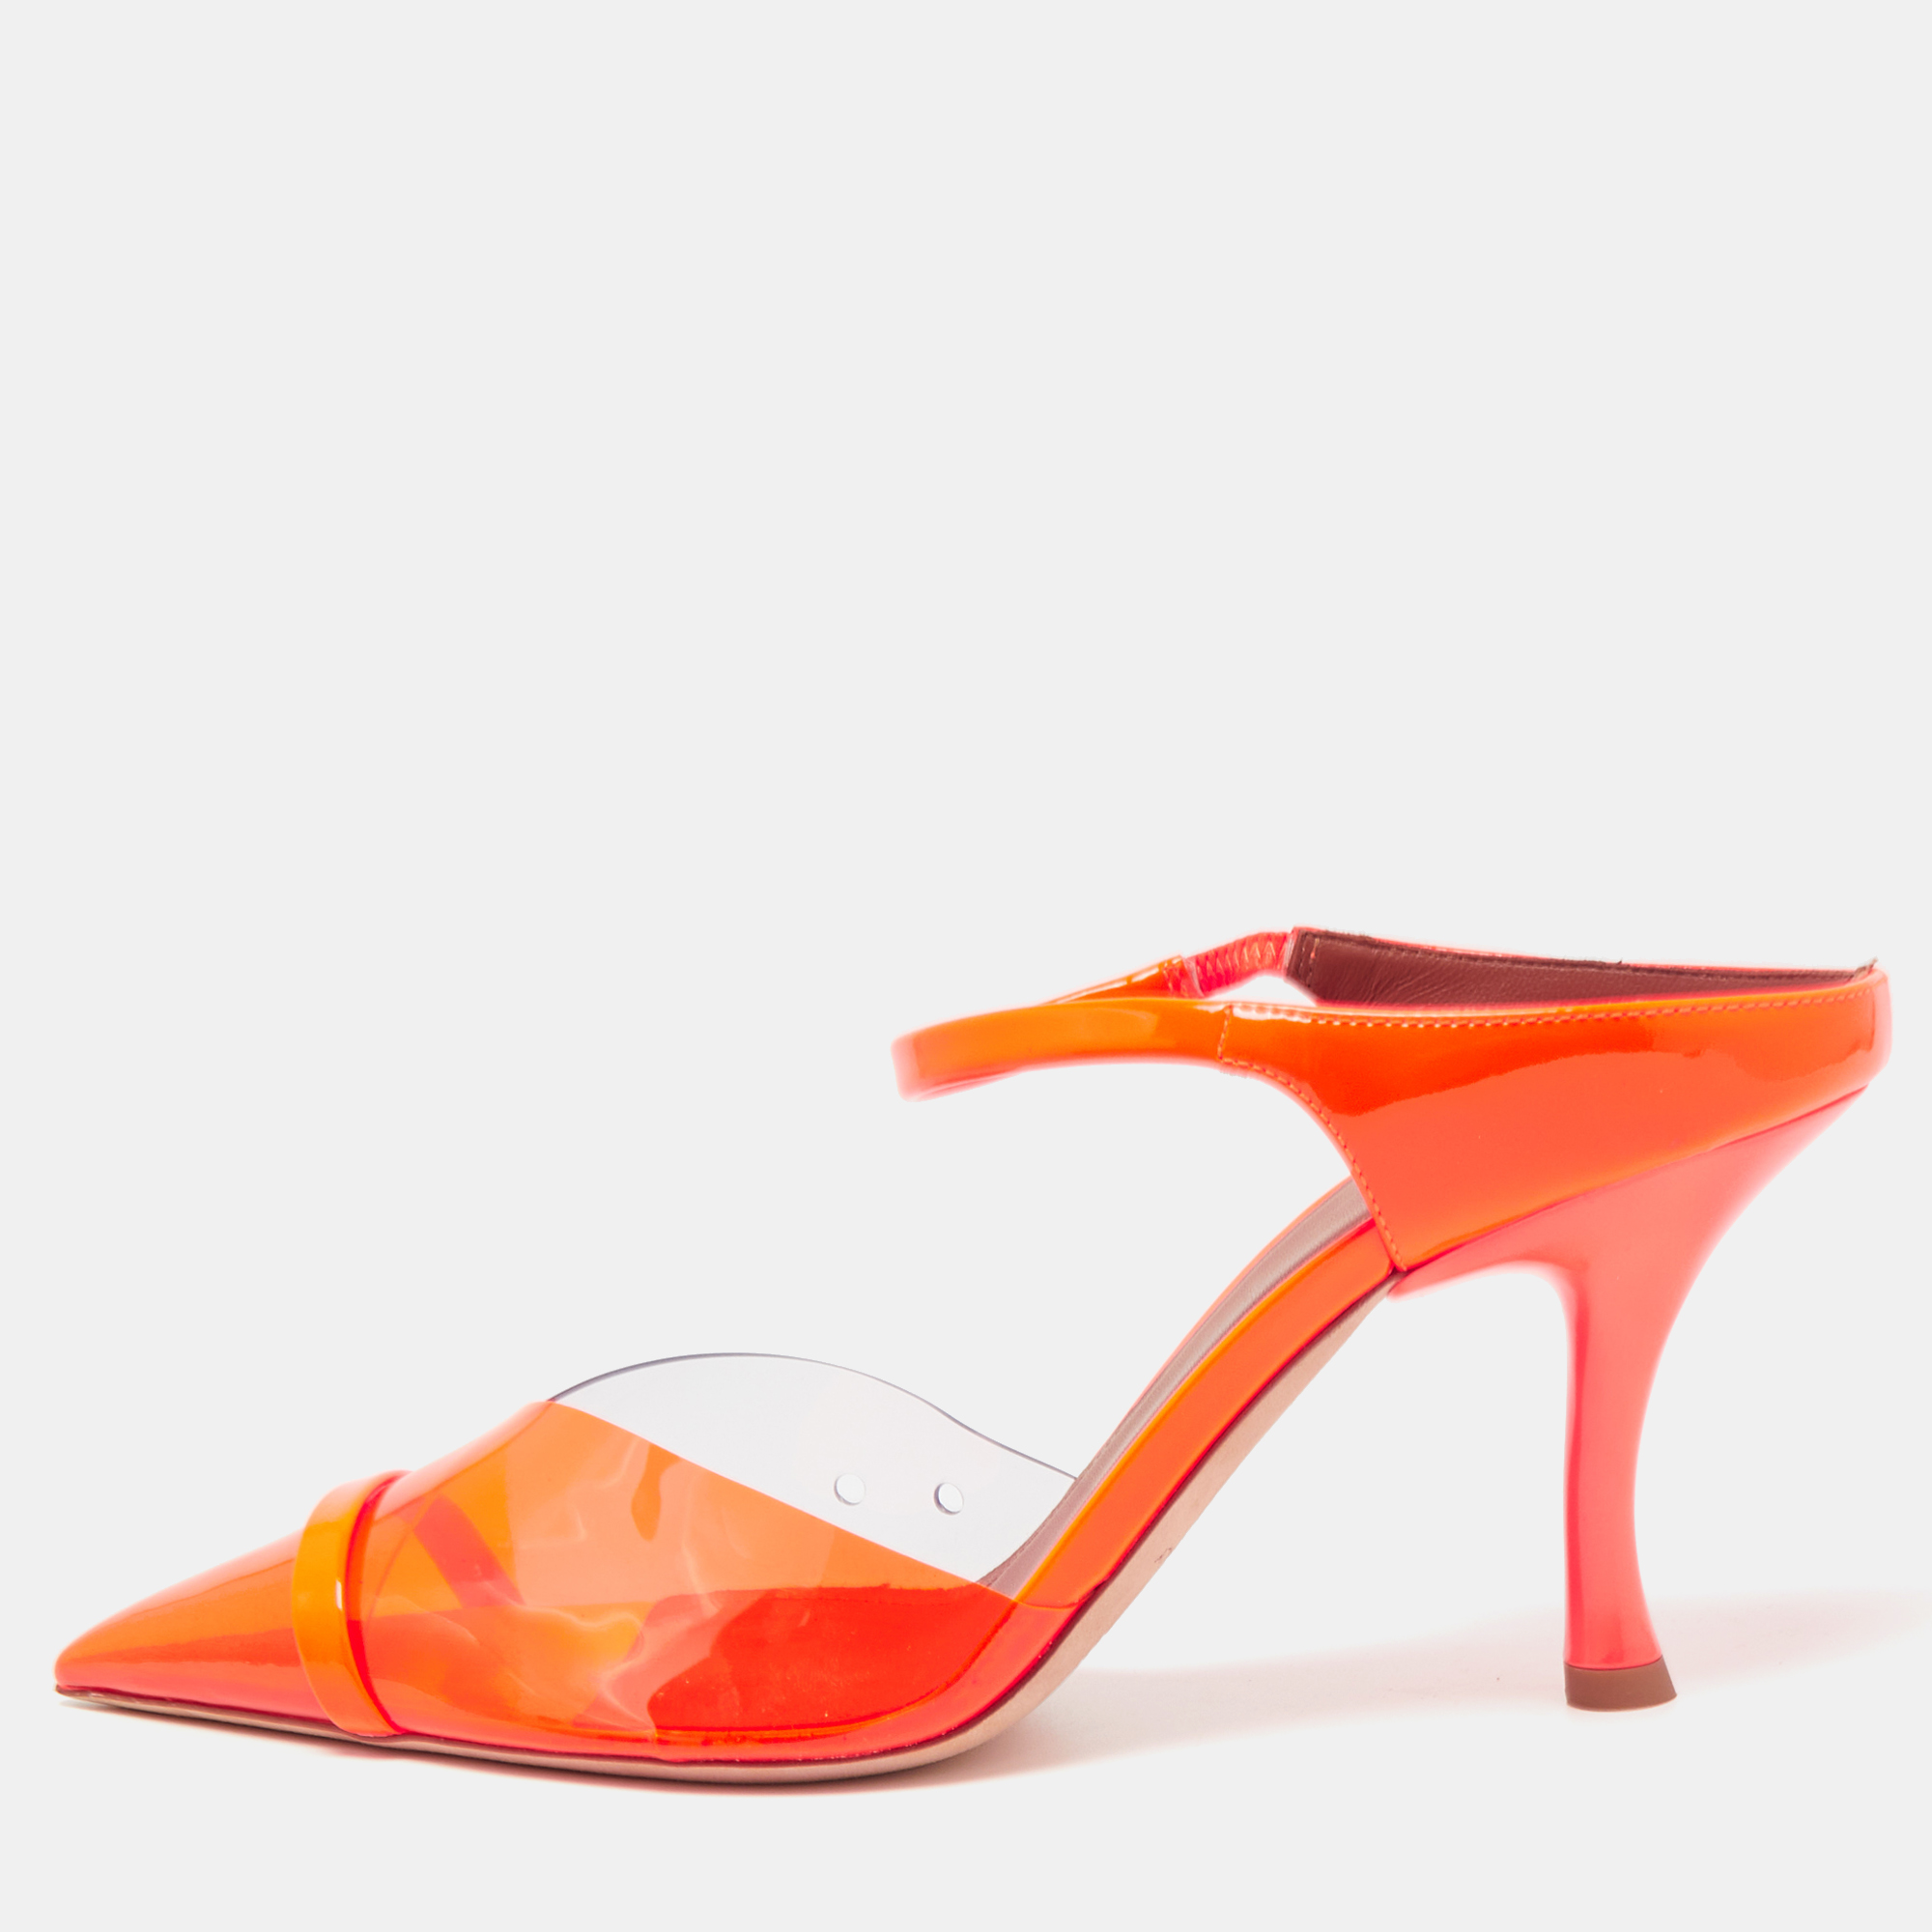 Malone souliers neon orange pvc and patent leather lona mules size 39.5